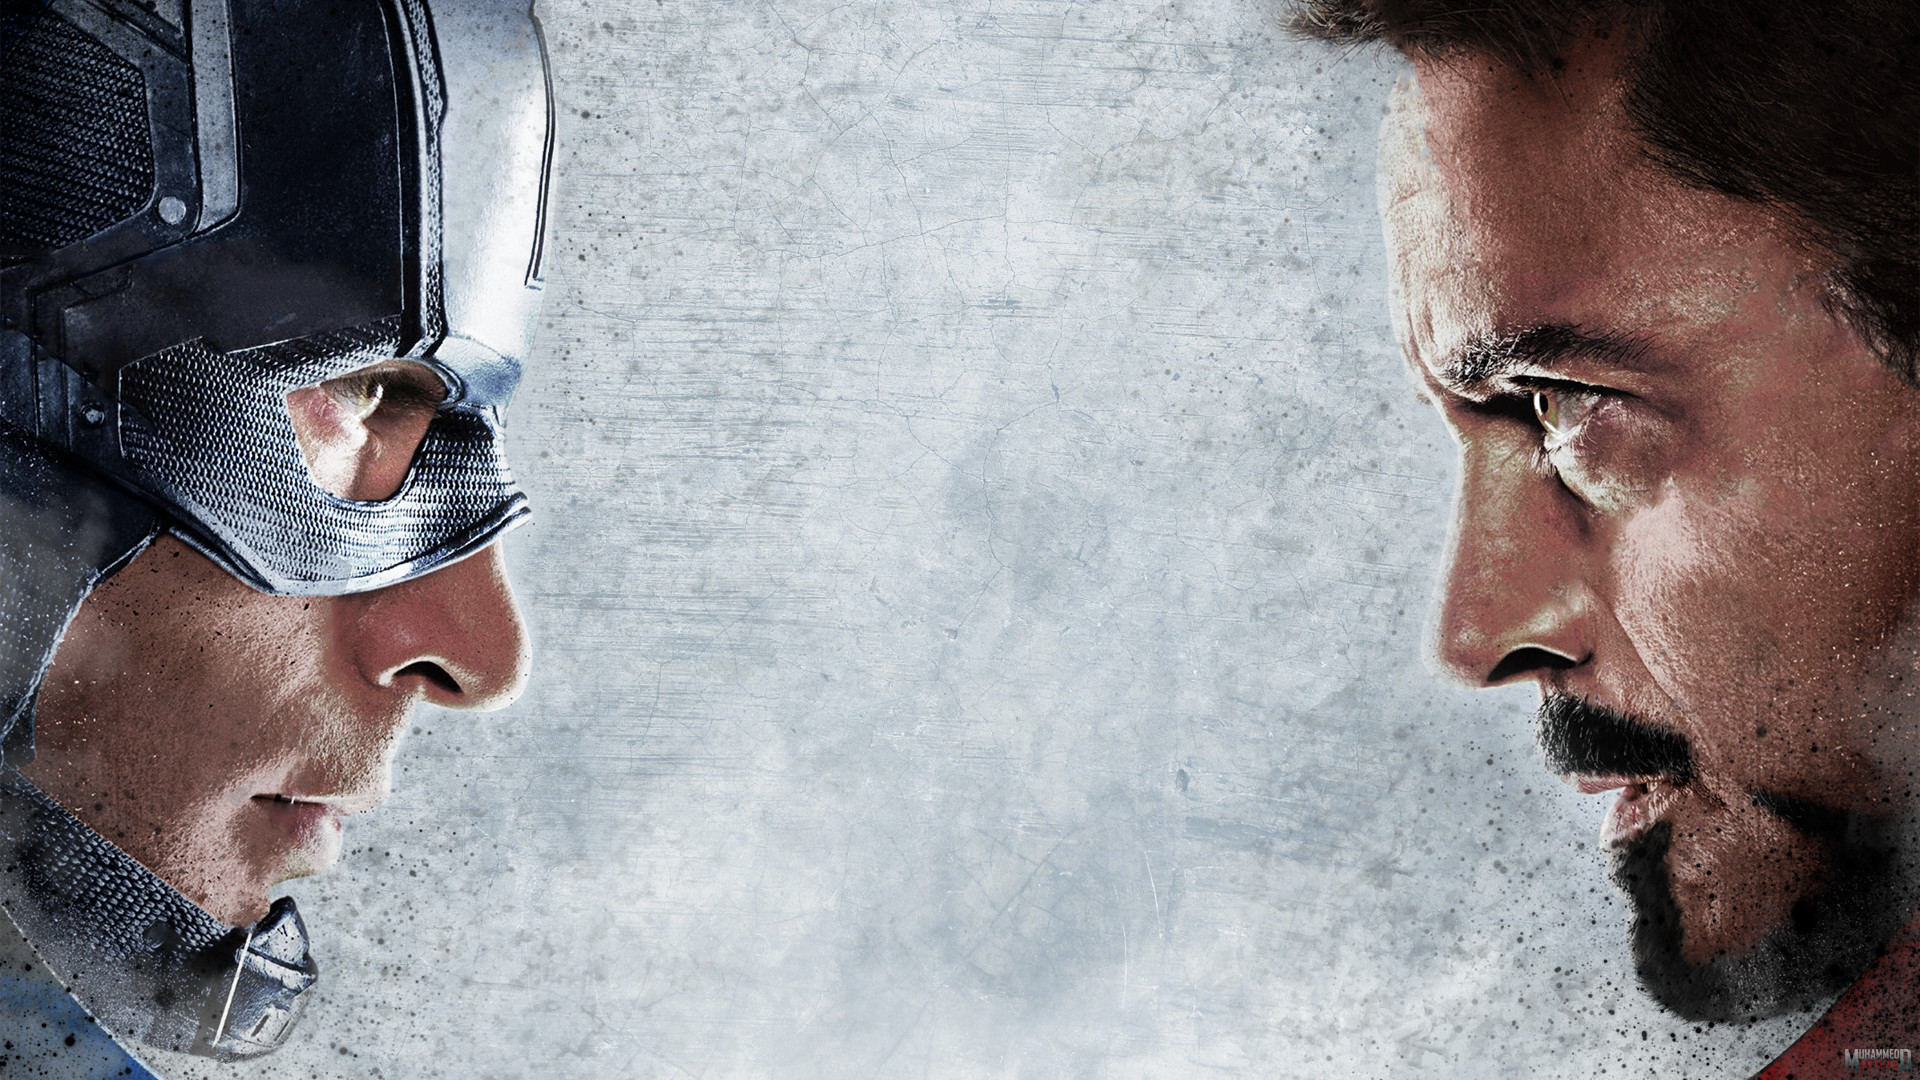 1920x1080 ... Images; Photos Galleries | UHP-4098693 Captain America Civil War Poster  2016 ...